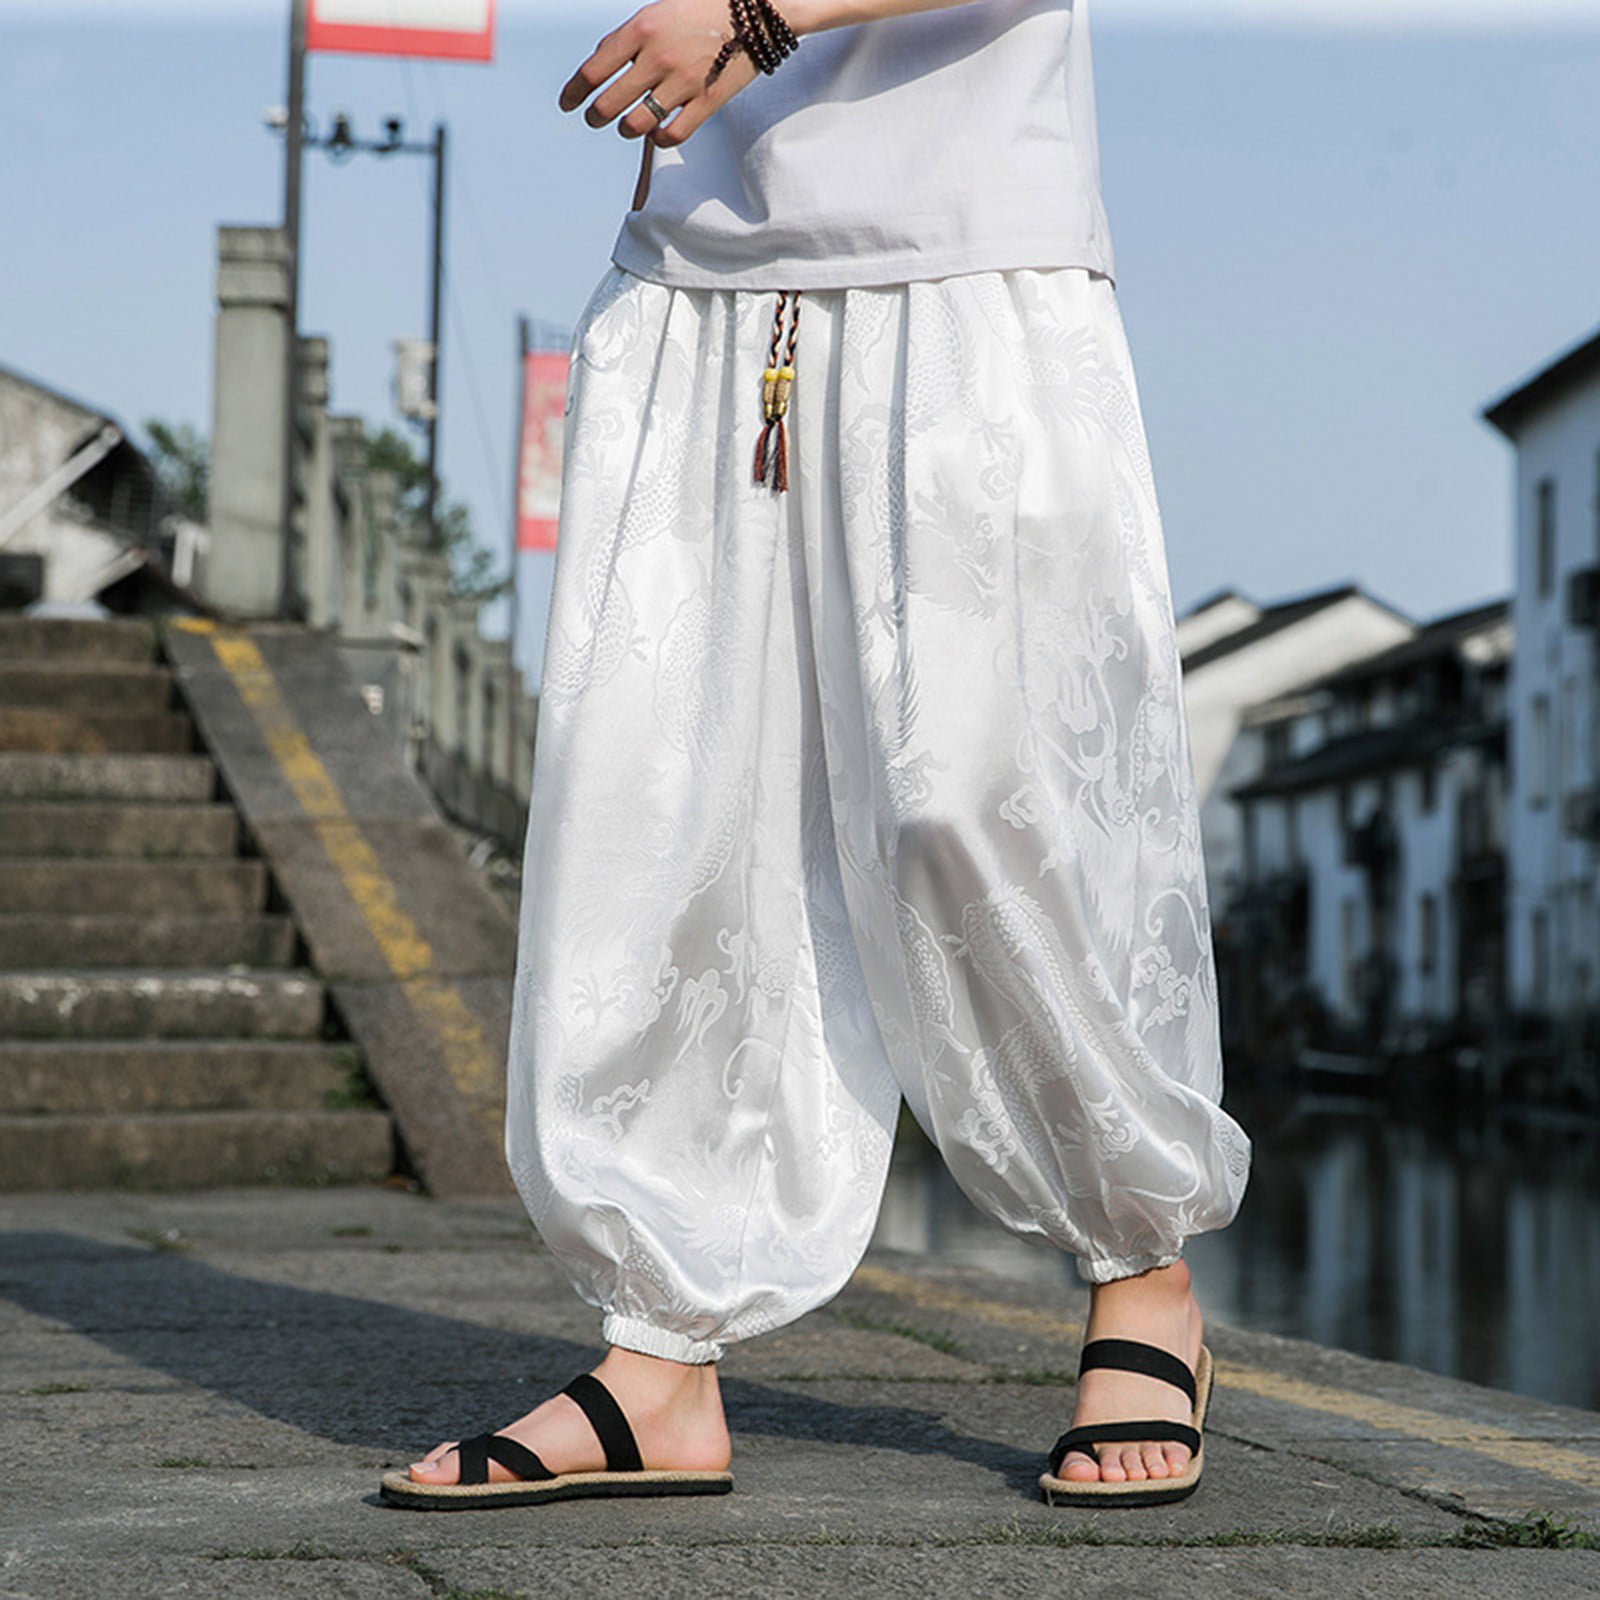 Men's Summer Casual Harem Pants With Print | Harem pants men, Linen harem  pants, Hip hop women